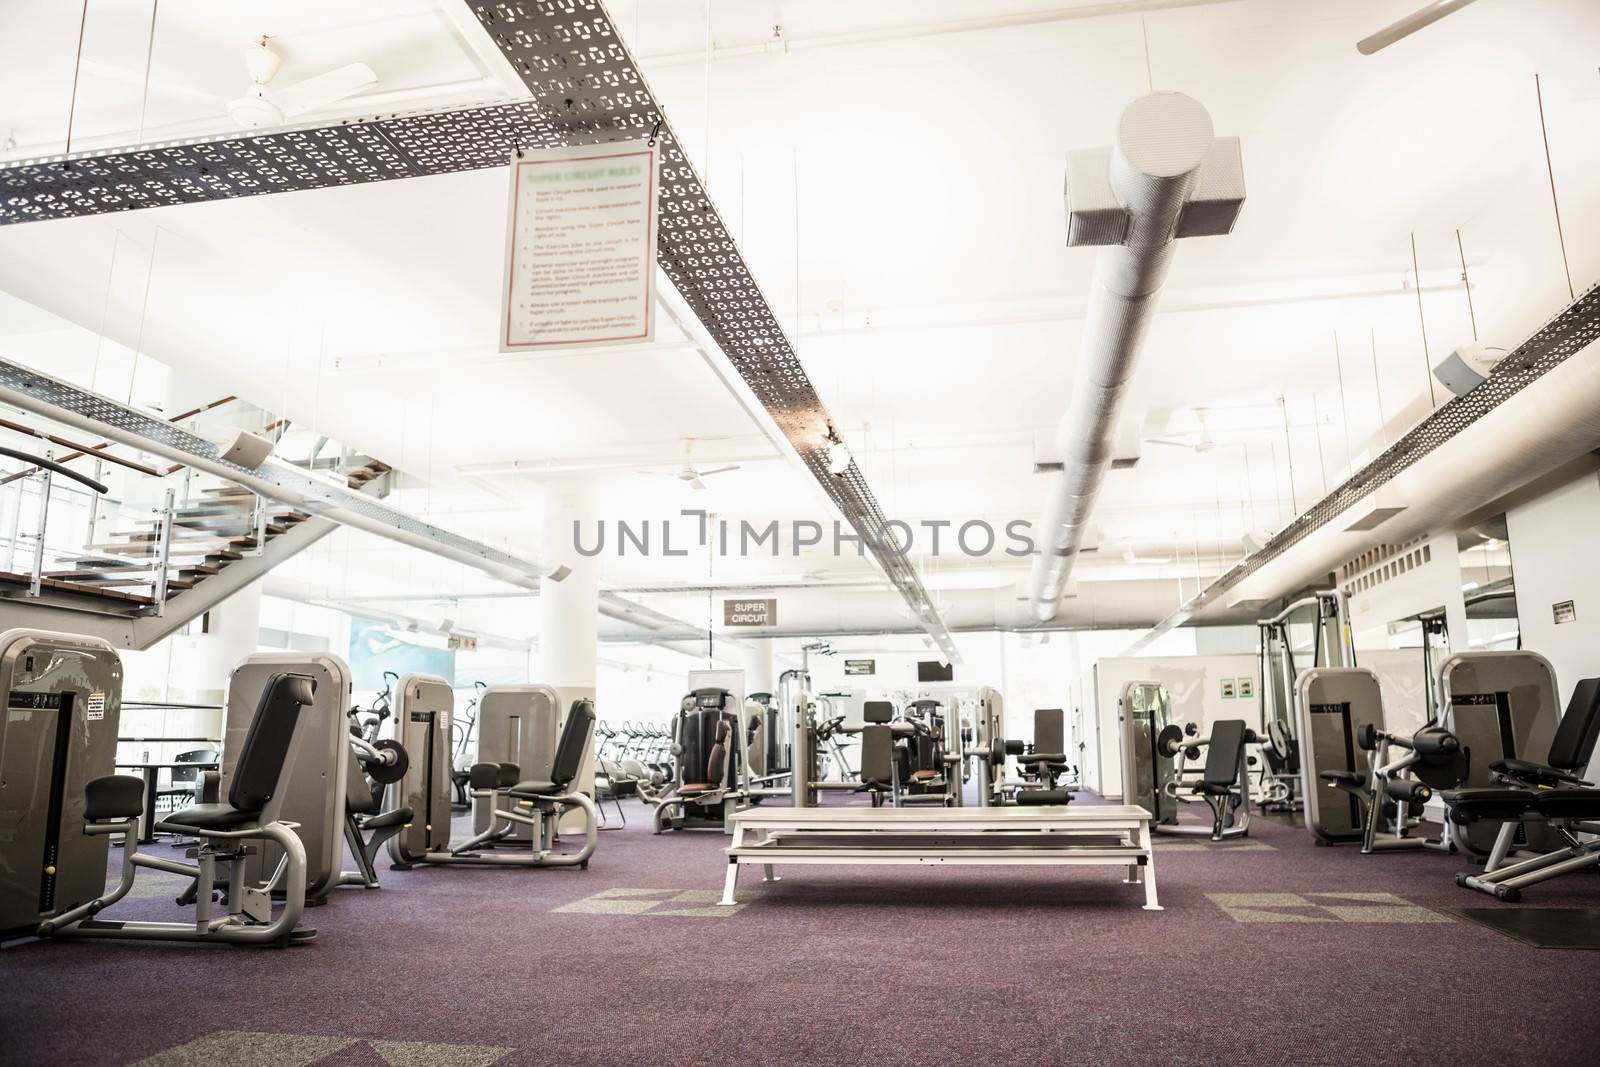 Gym with no people interior